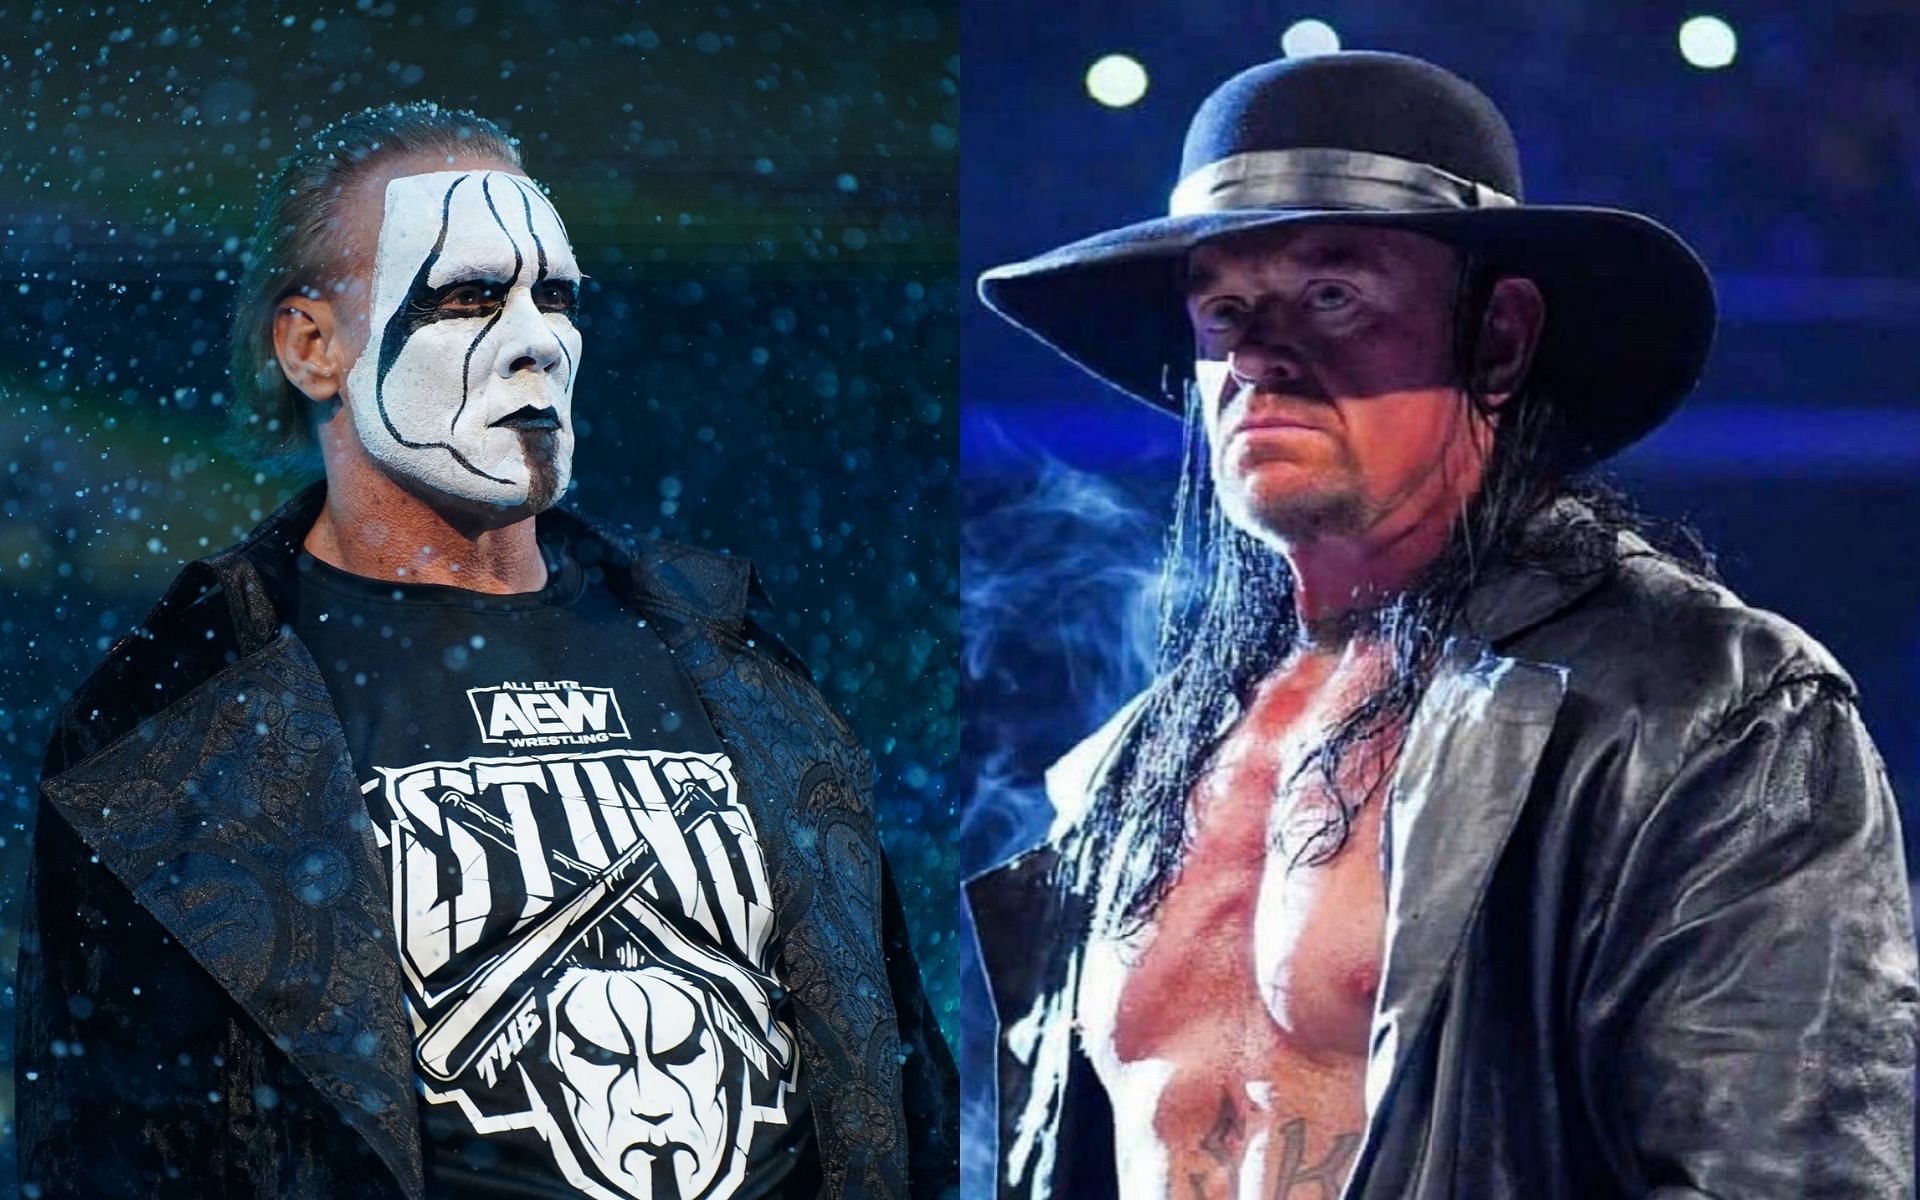 Undertaker and Sting under the microscope of legendary J.J. Dillon